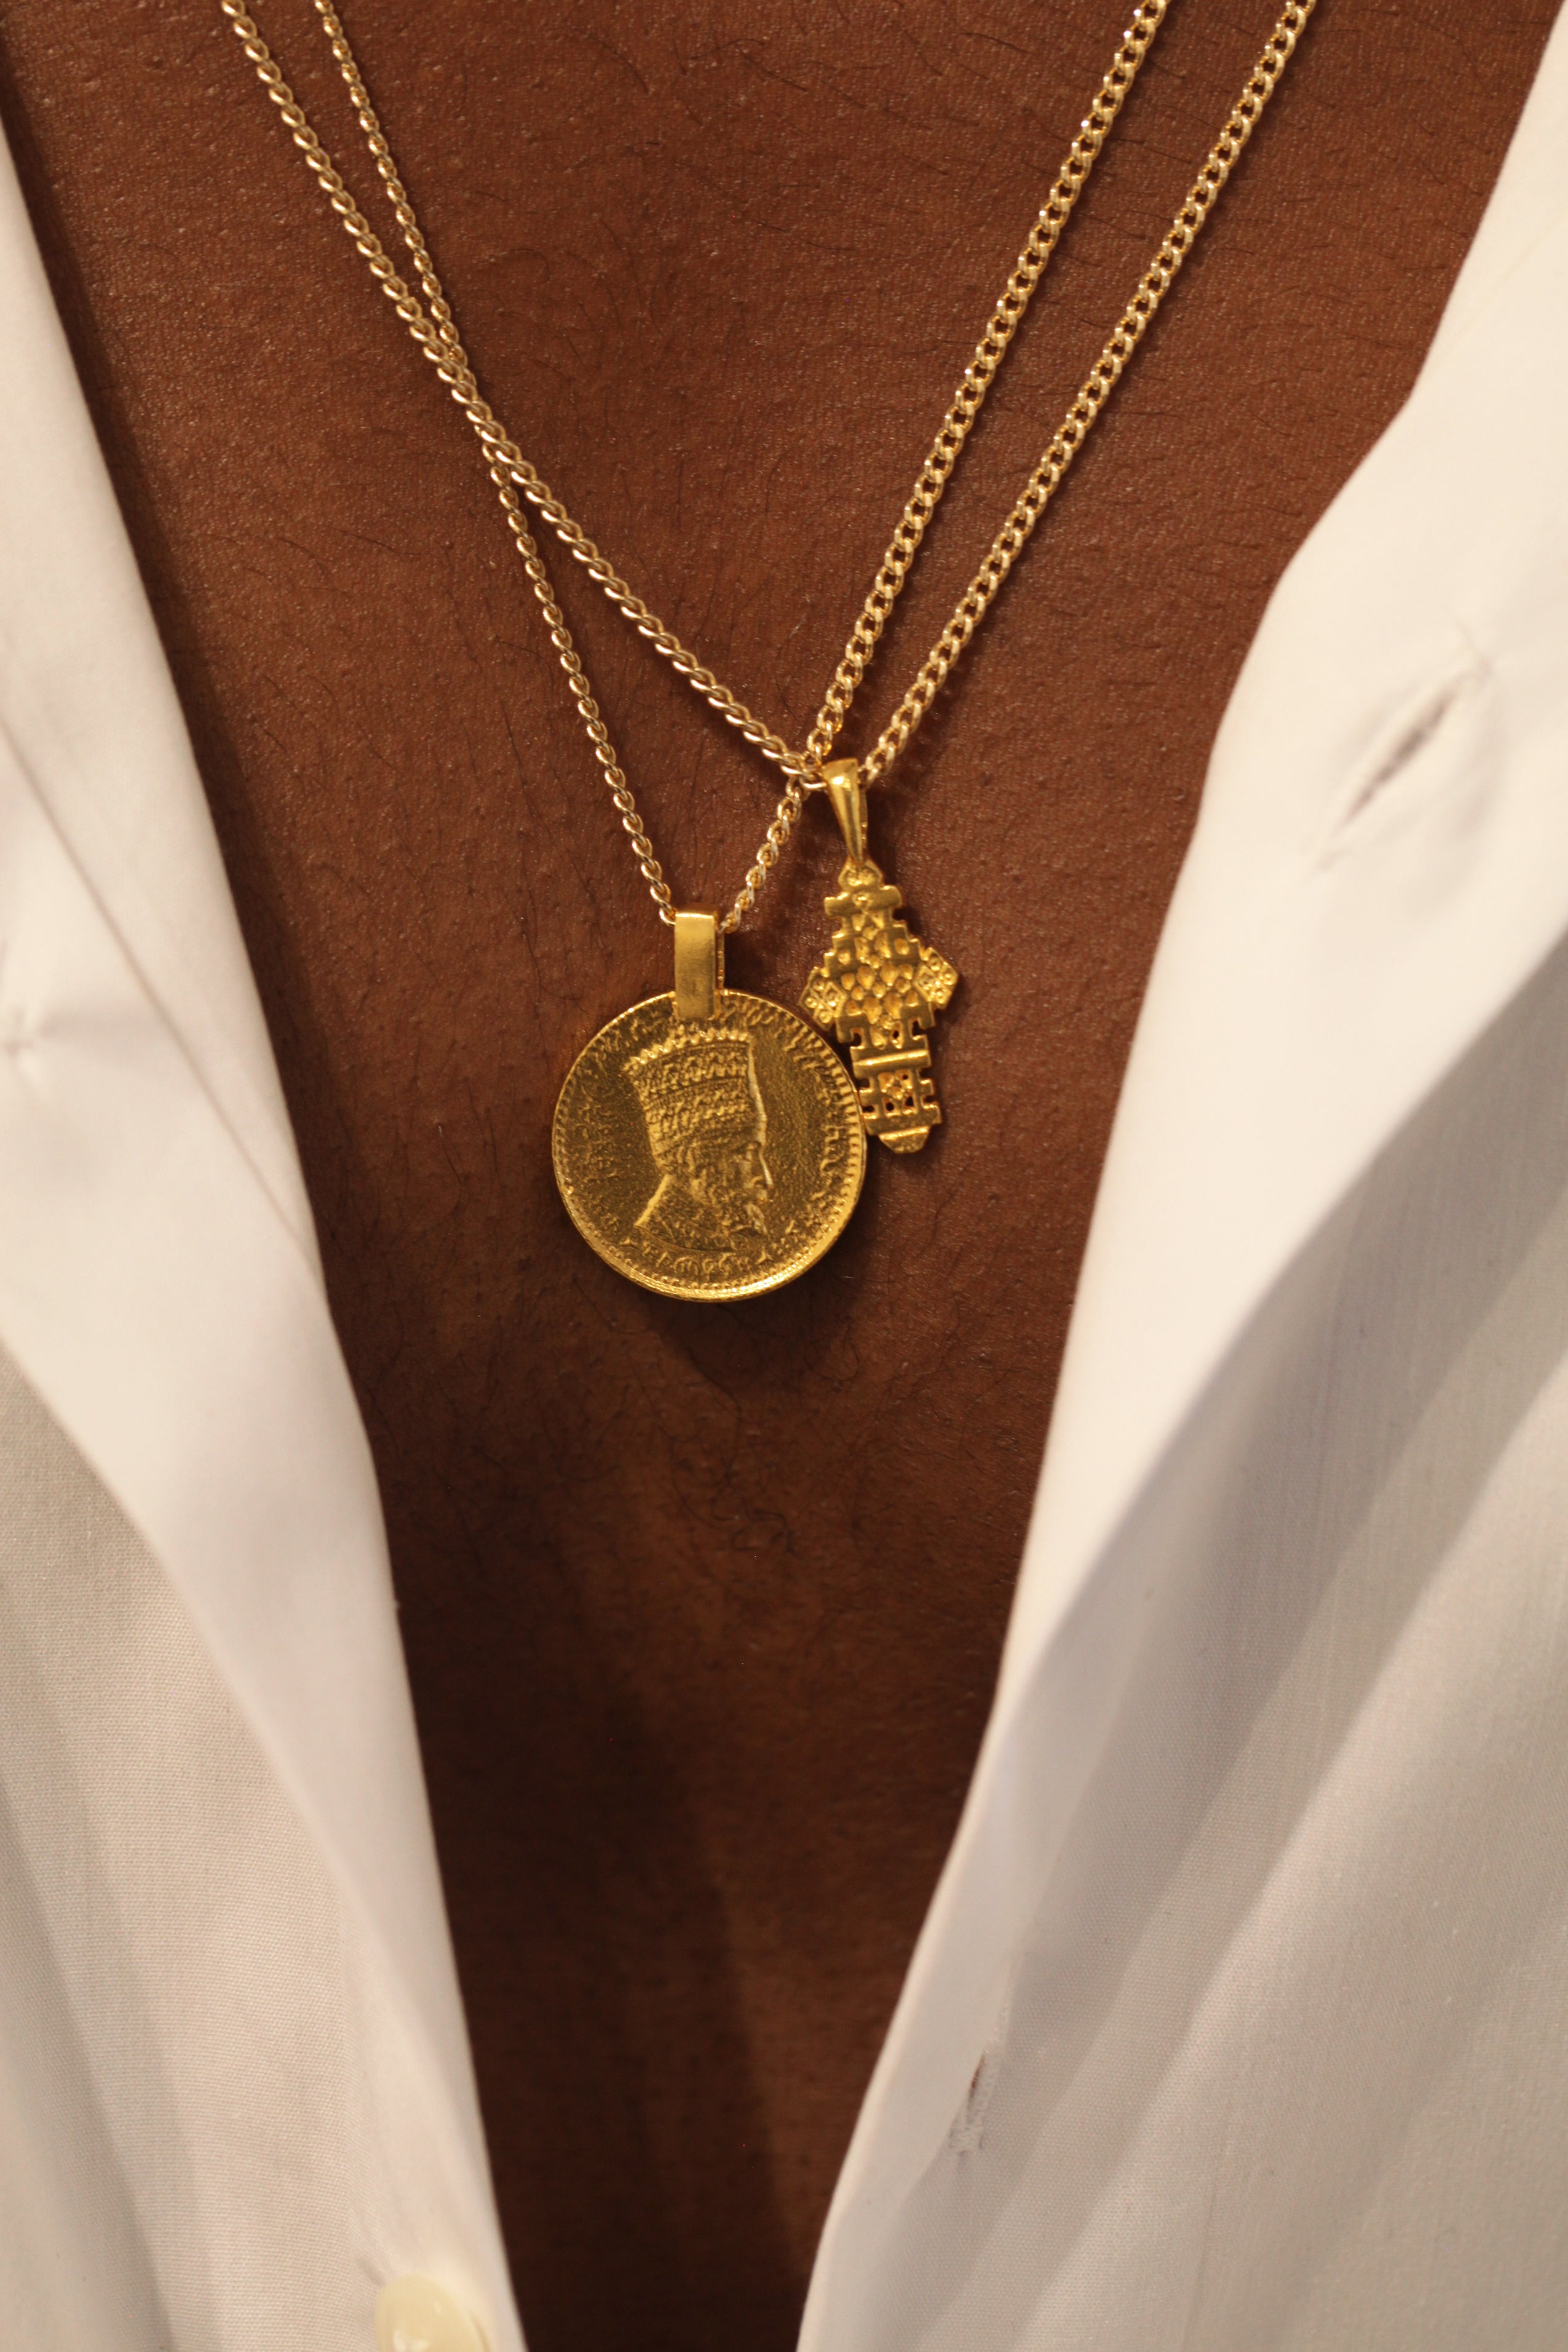 Golden Ethiopian Ring Necklace on Gold Chain – Collarbone Jewelry